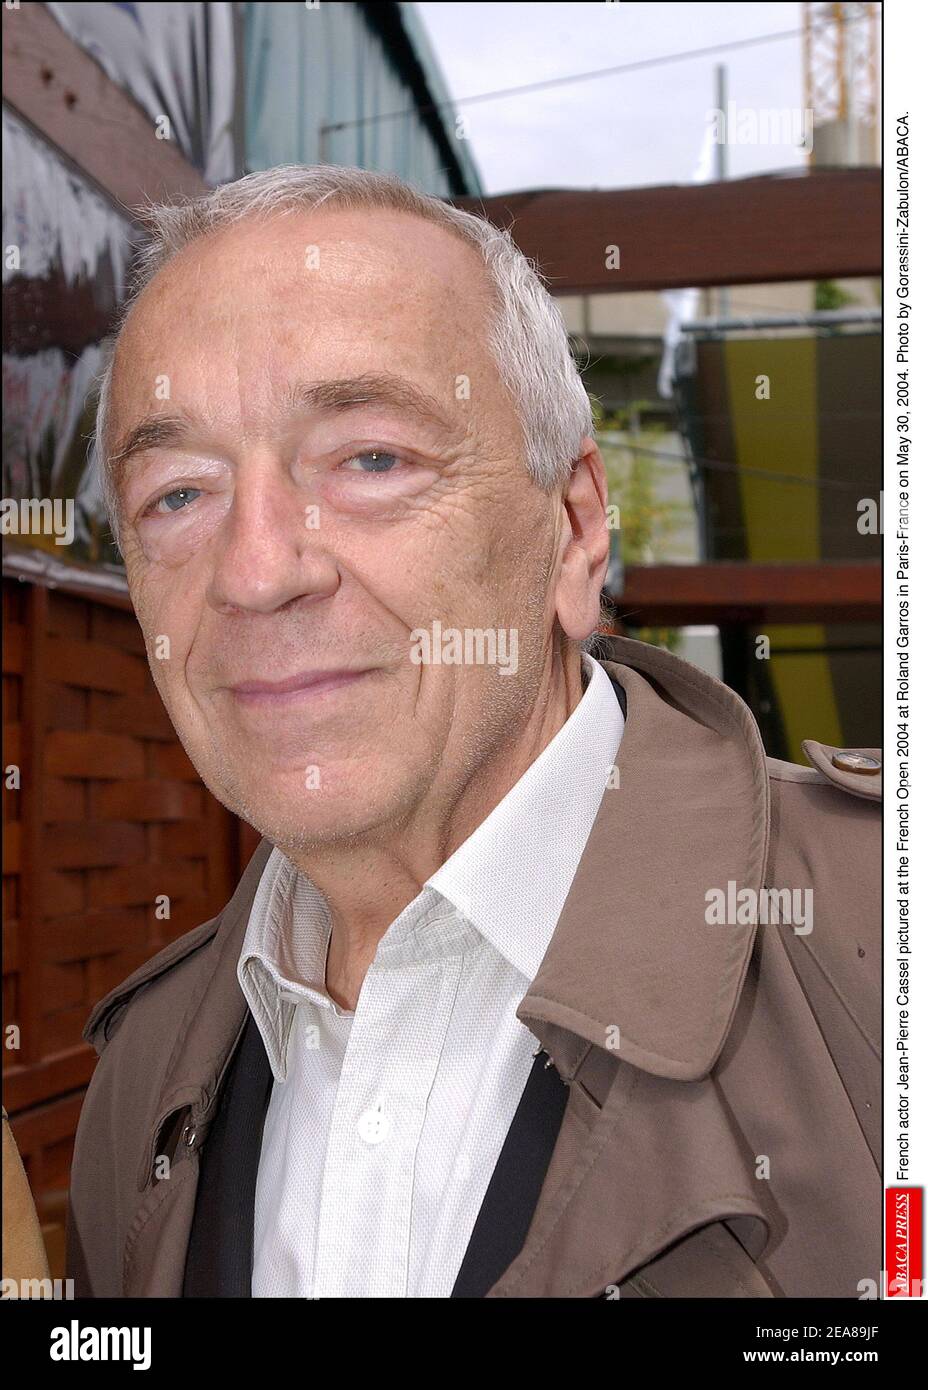 French actor Jean-Pierre Cassel attends the Lancel store opening party on  the Champs Elysees, in Paris, France, on January 26, 2006. Photo by Nicolas  Gouhier/ABACAPRESS.COM Stock Photo - Alamy